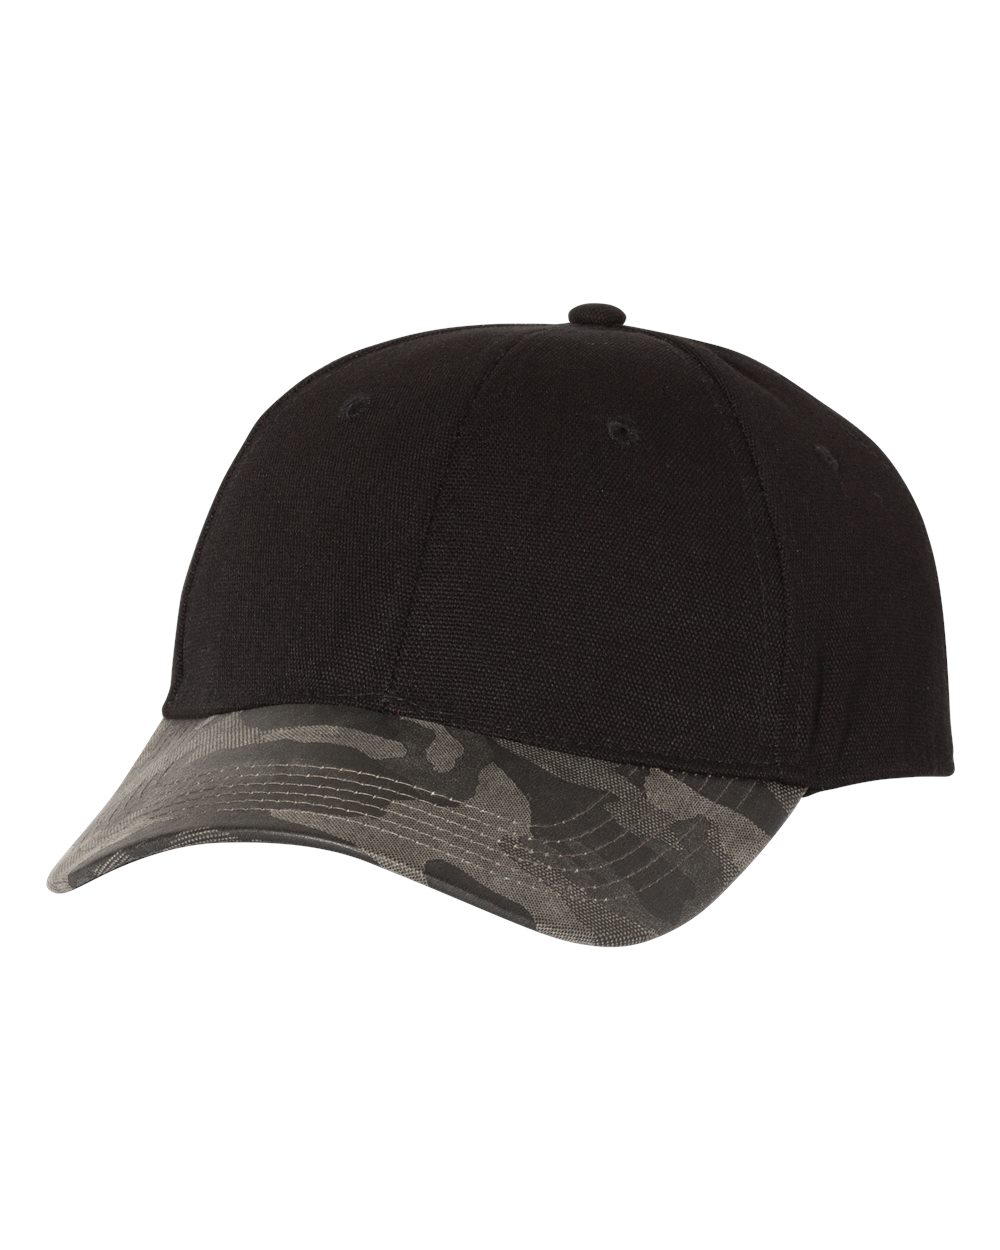 Outdoor Cap GHP100 - Canvas Crown with Weathered Camo Visor